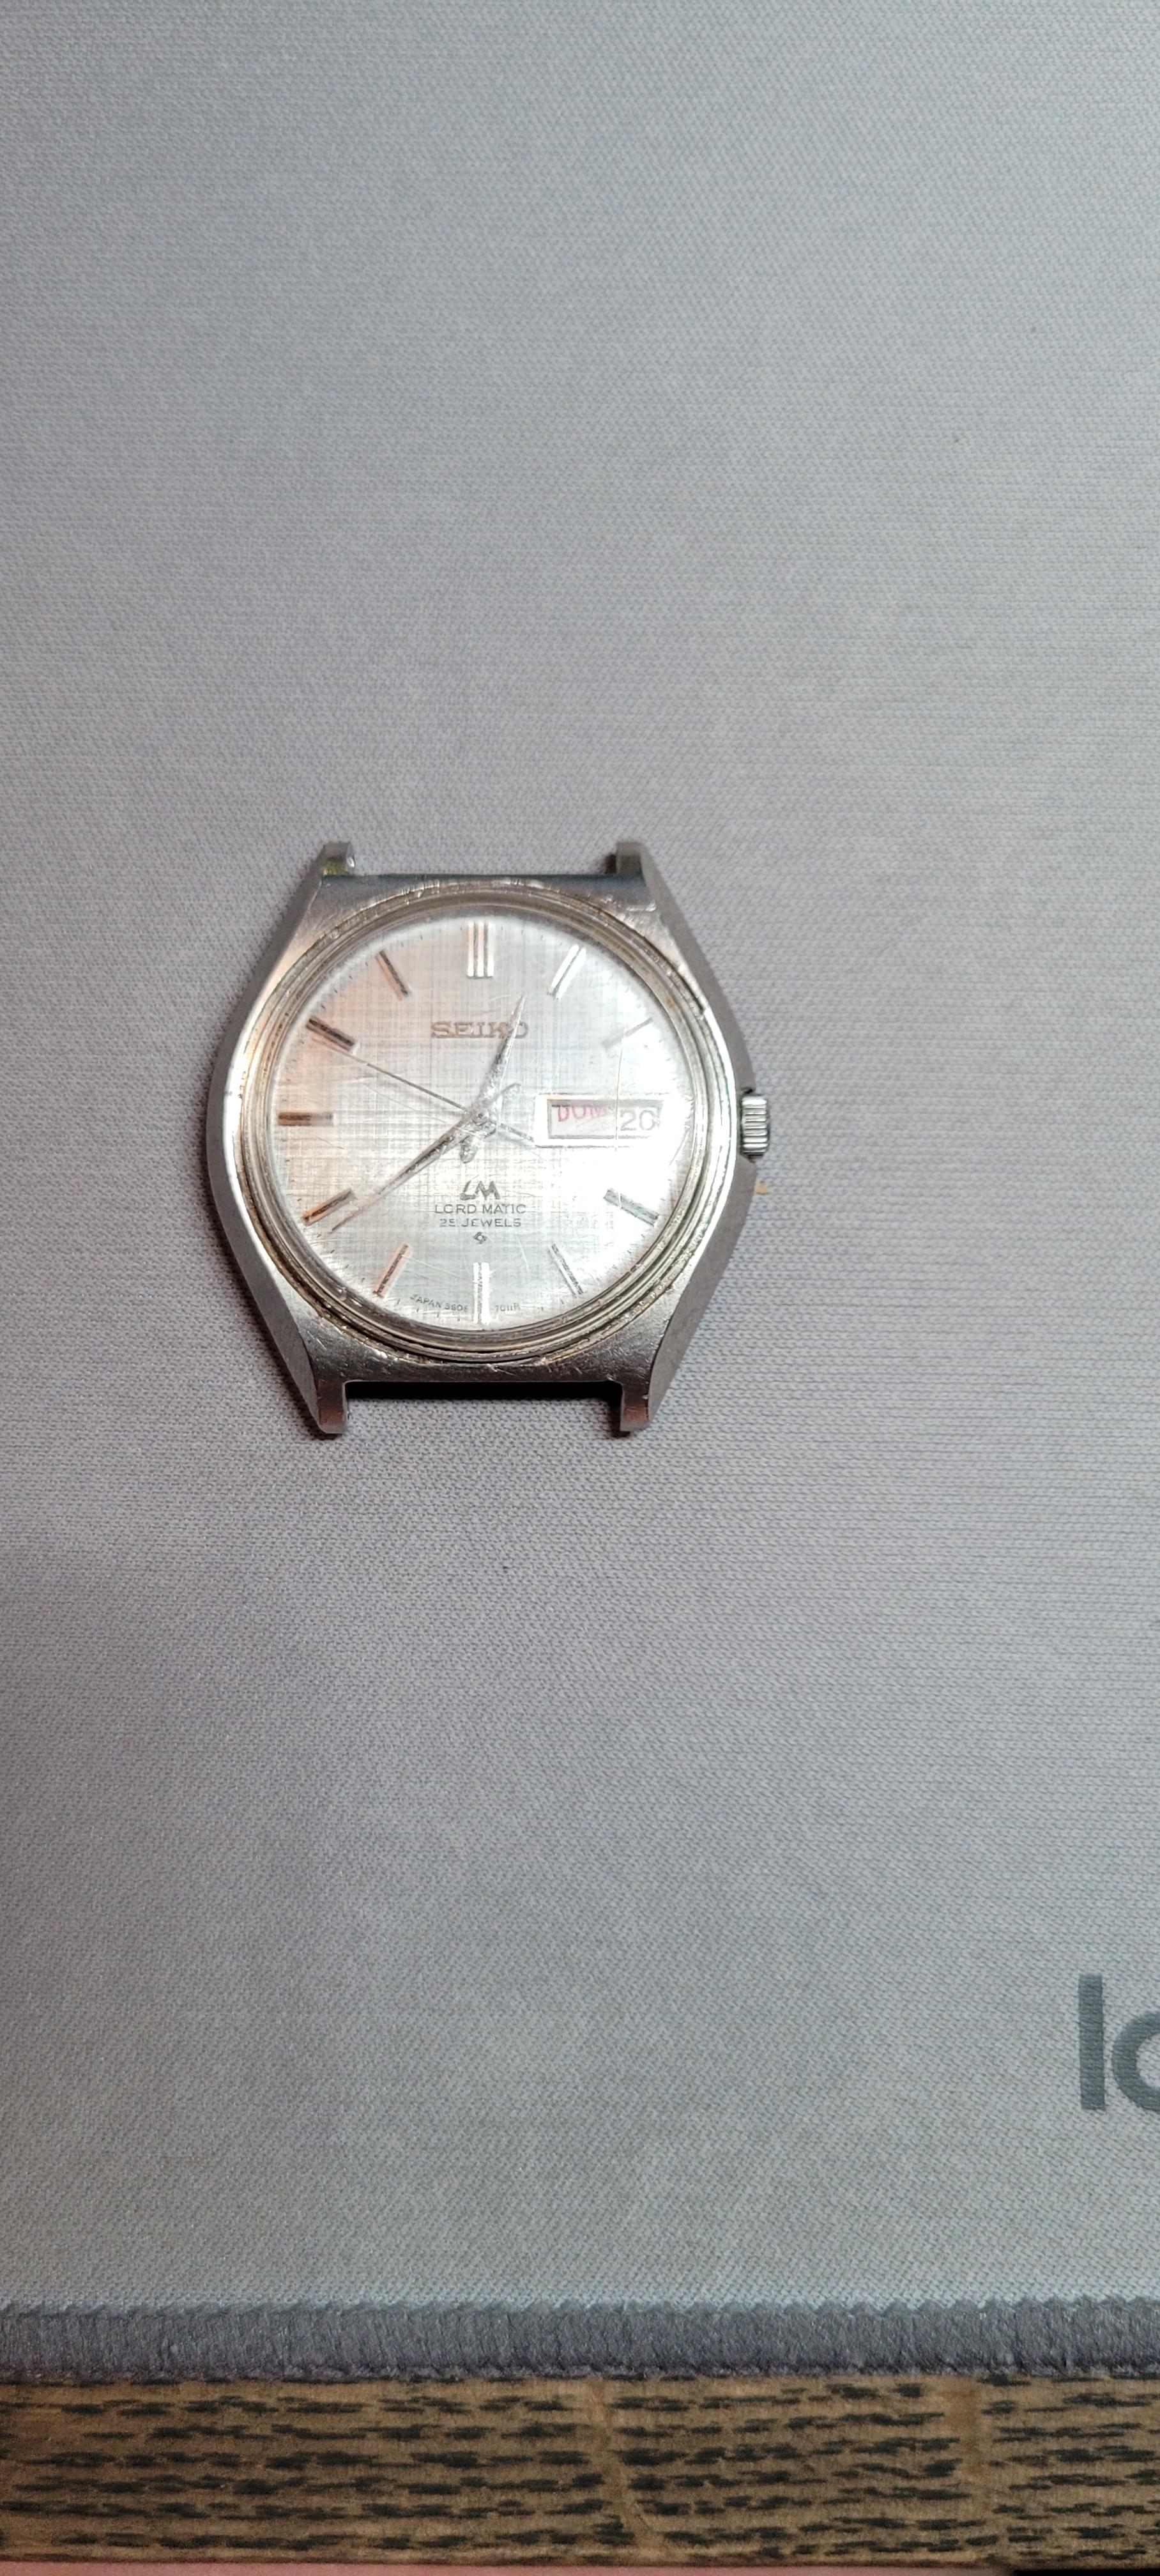 Seiko Lord Matic Help - Watch Case Issues, Opening, Movement/Stem 